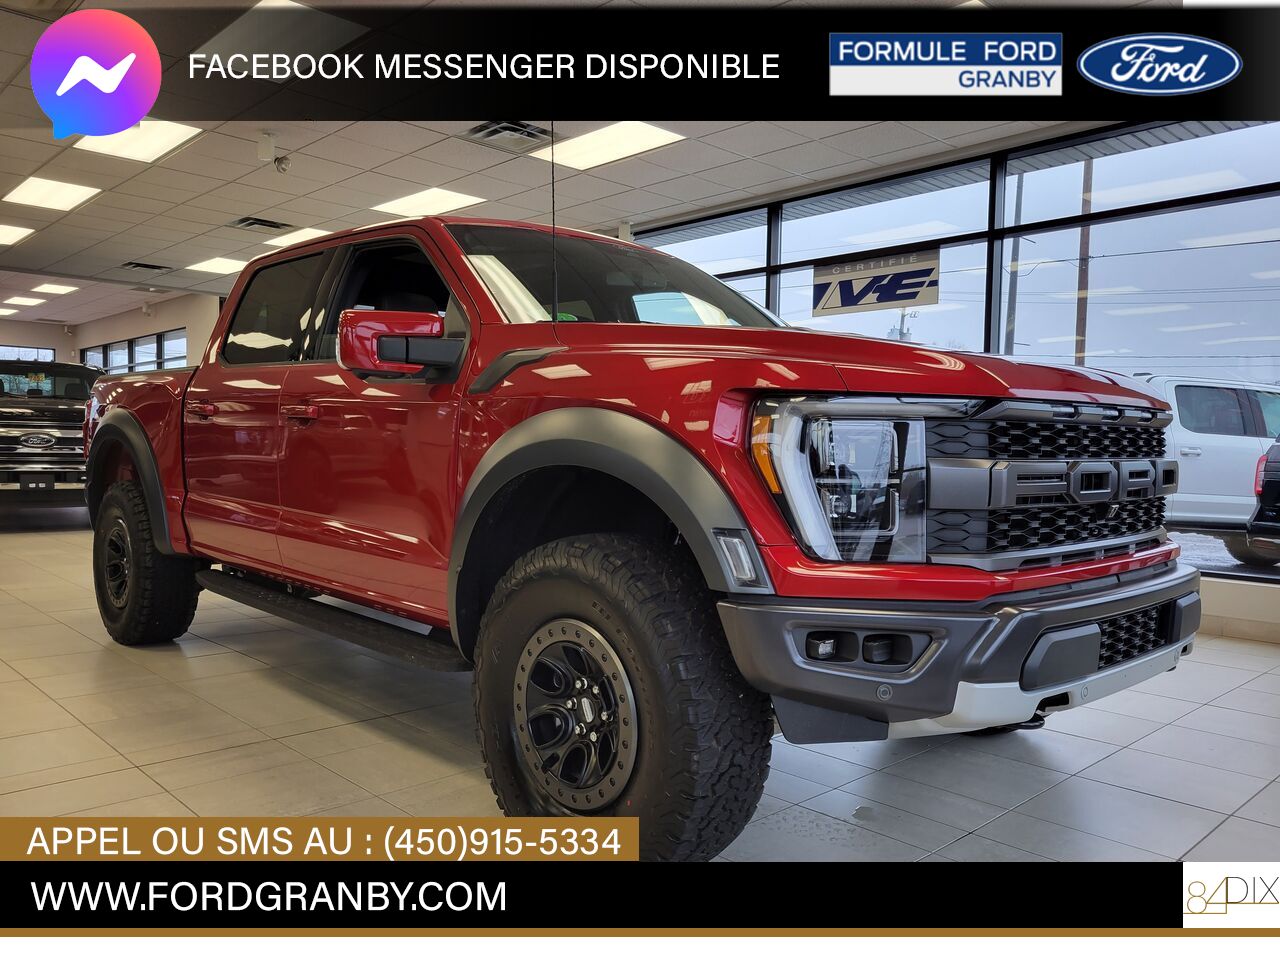 2022 FORD  Granby - photo #0